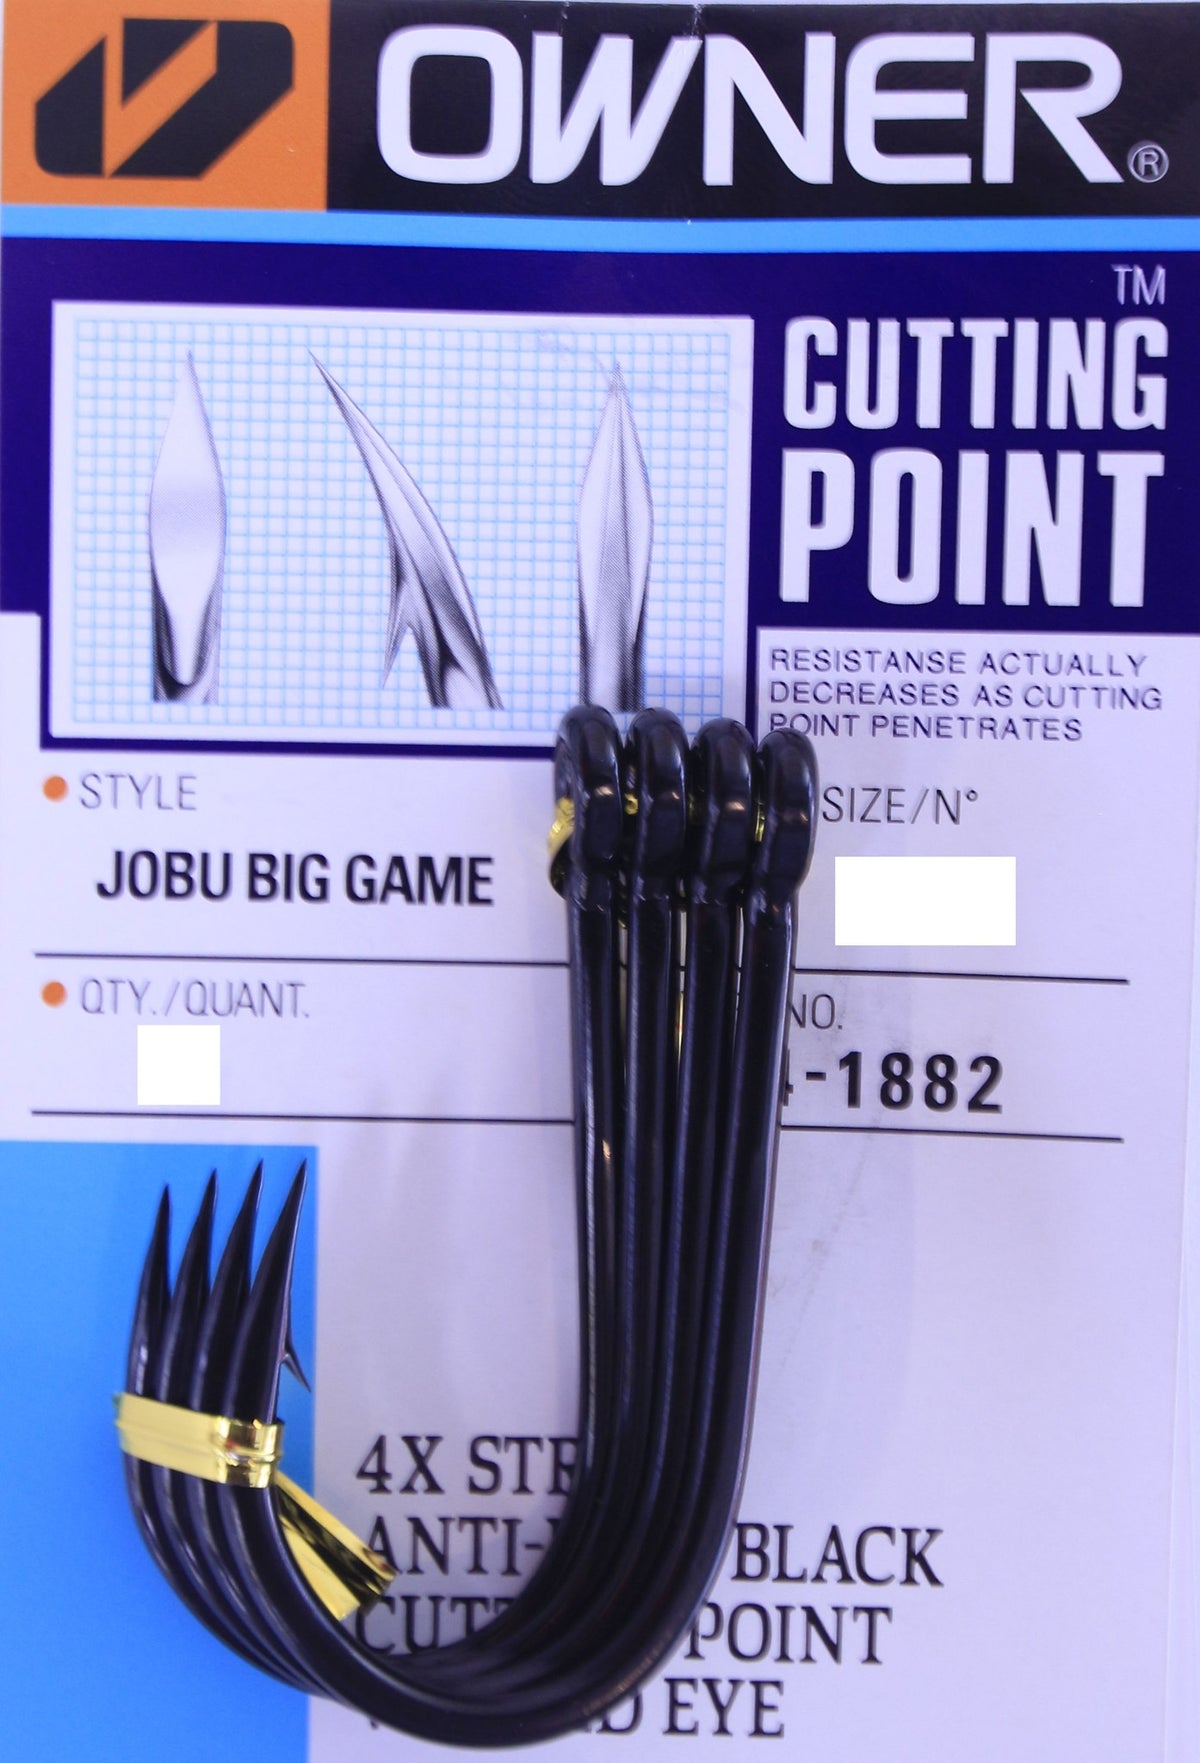 Check Out Our Exciting Line of Owner Jobu Big Game Hook- Size 8/0